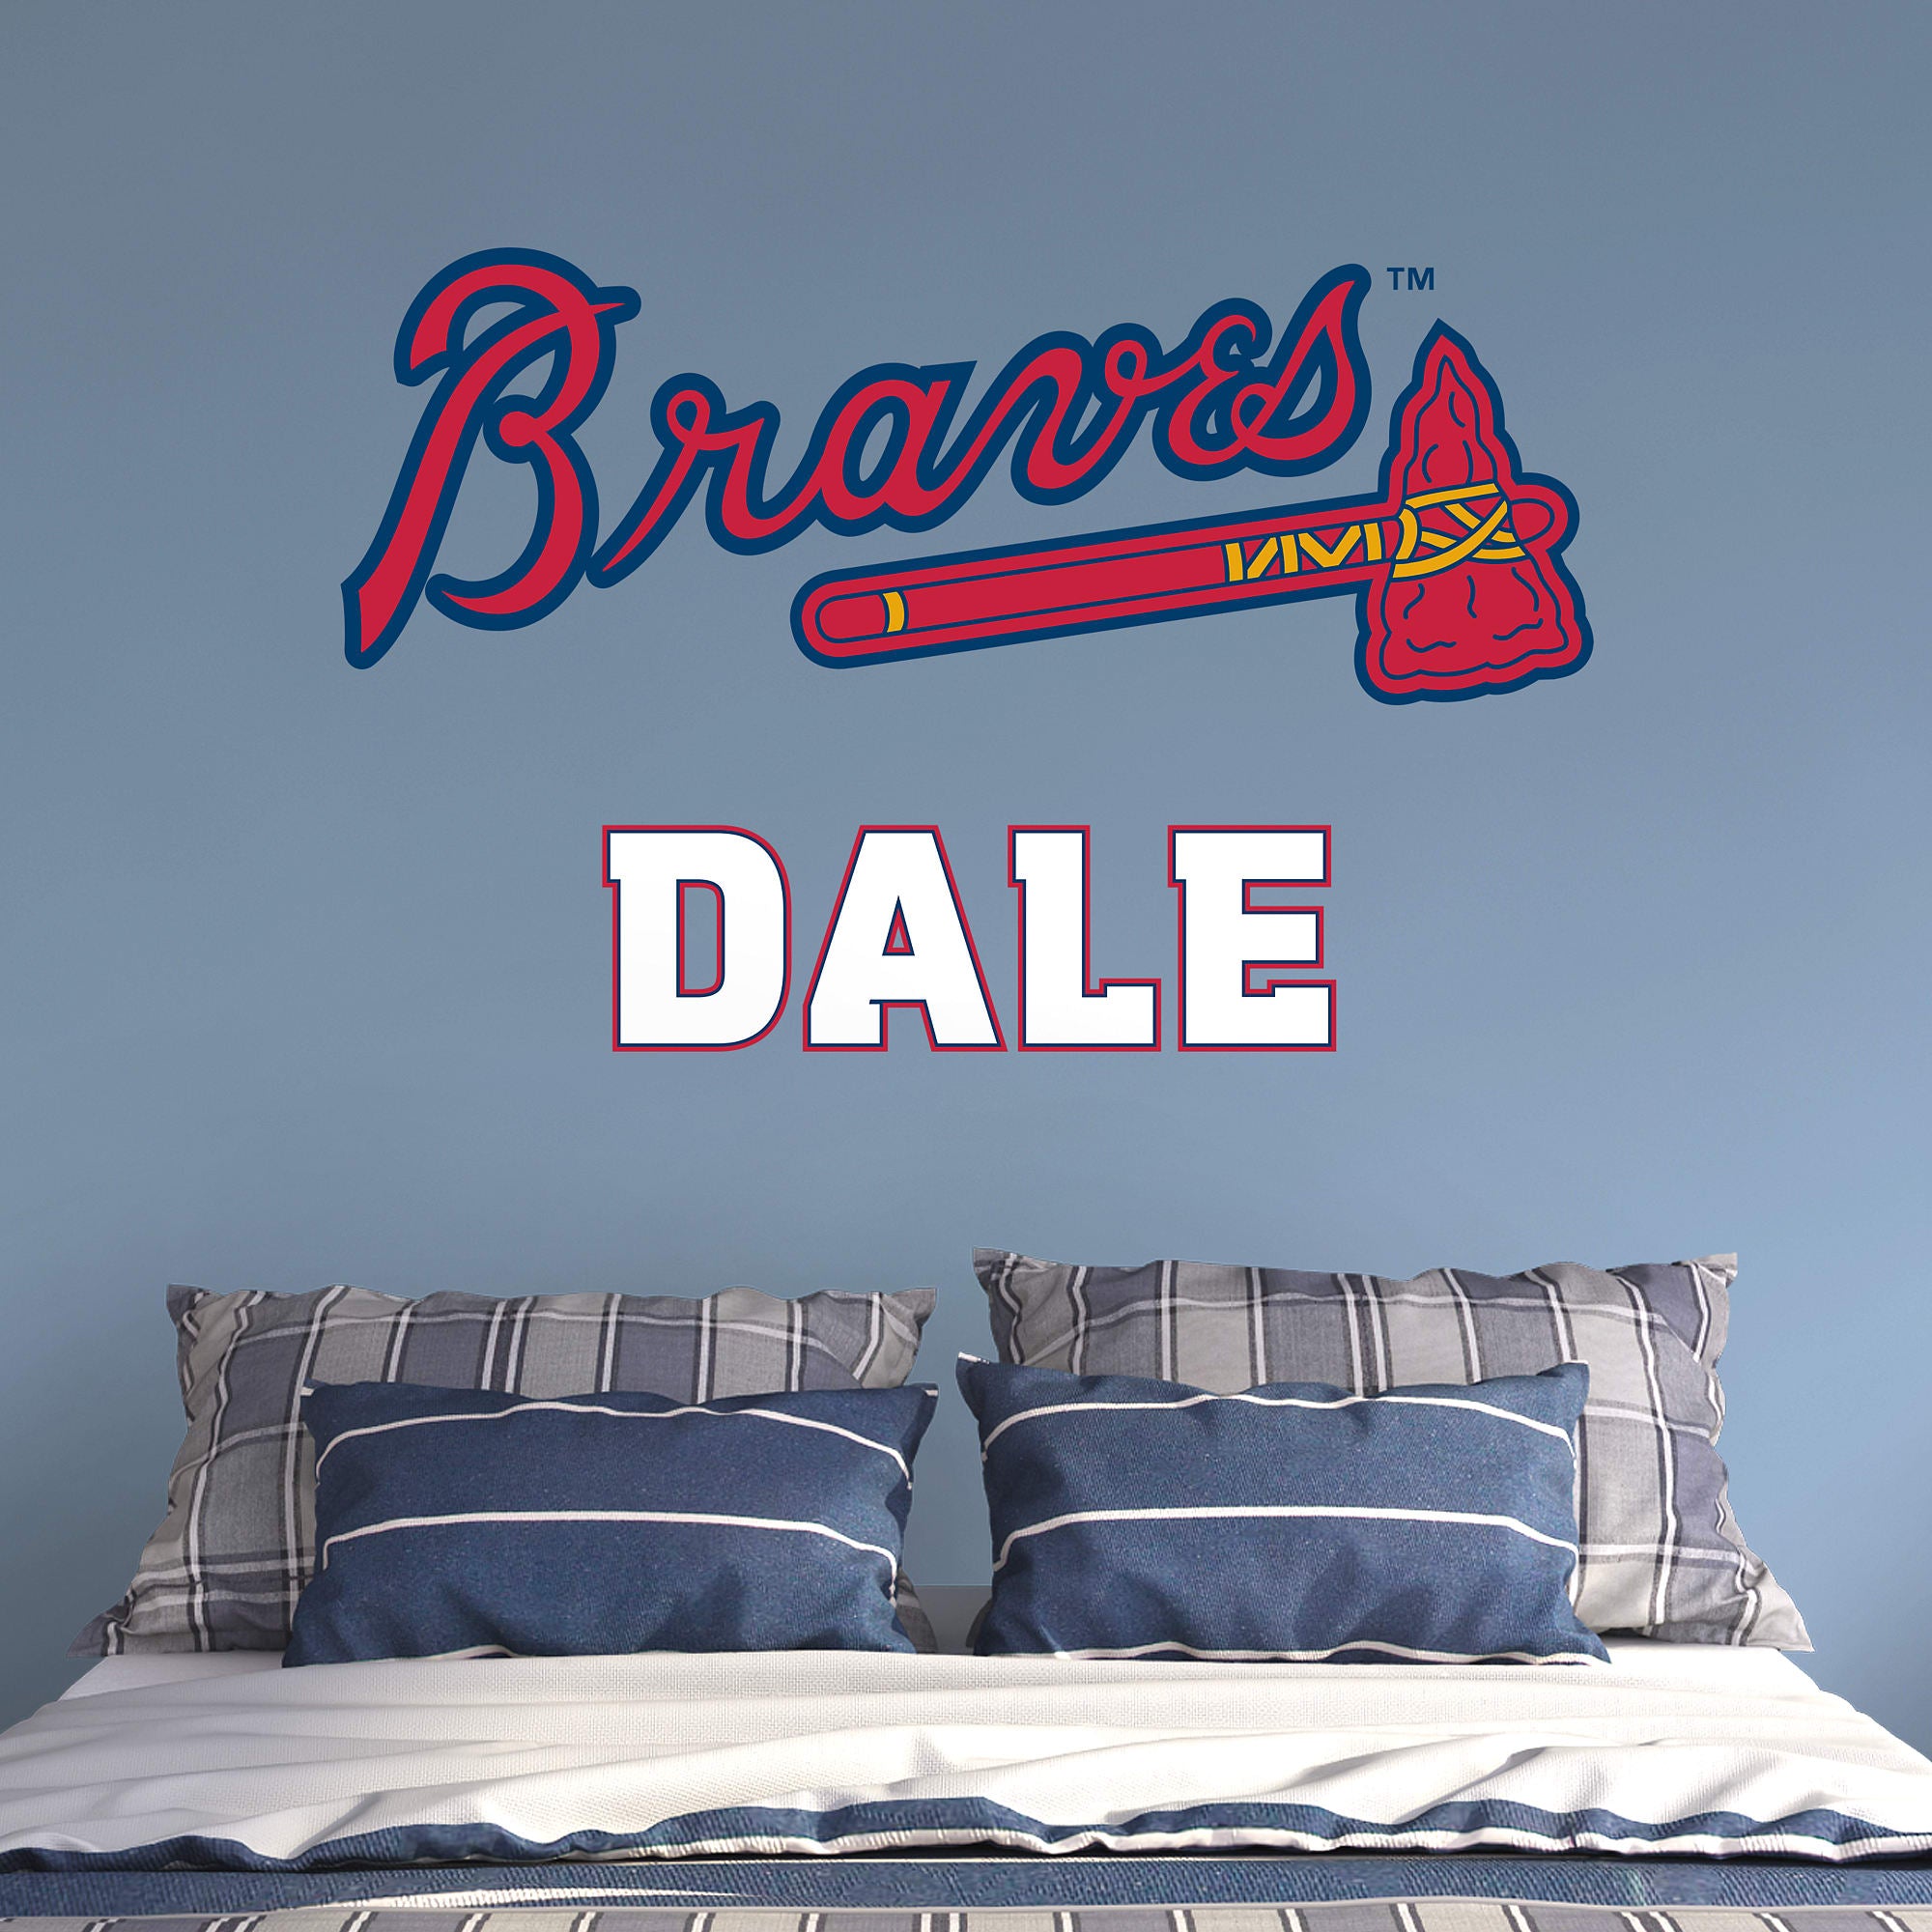 Atlanta Braves: Stacked Personalized Name - Officially Licensed MLB Transfer Decal in White (52"W x 39.5"H) by Fathead | Vinyl